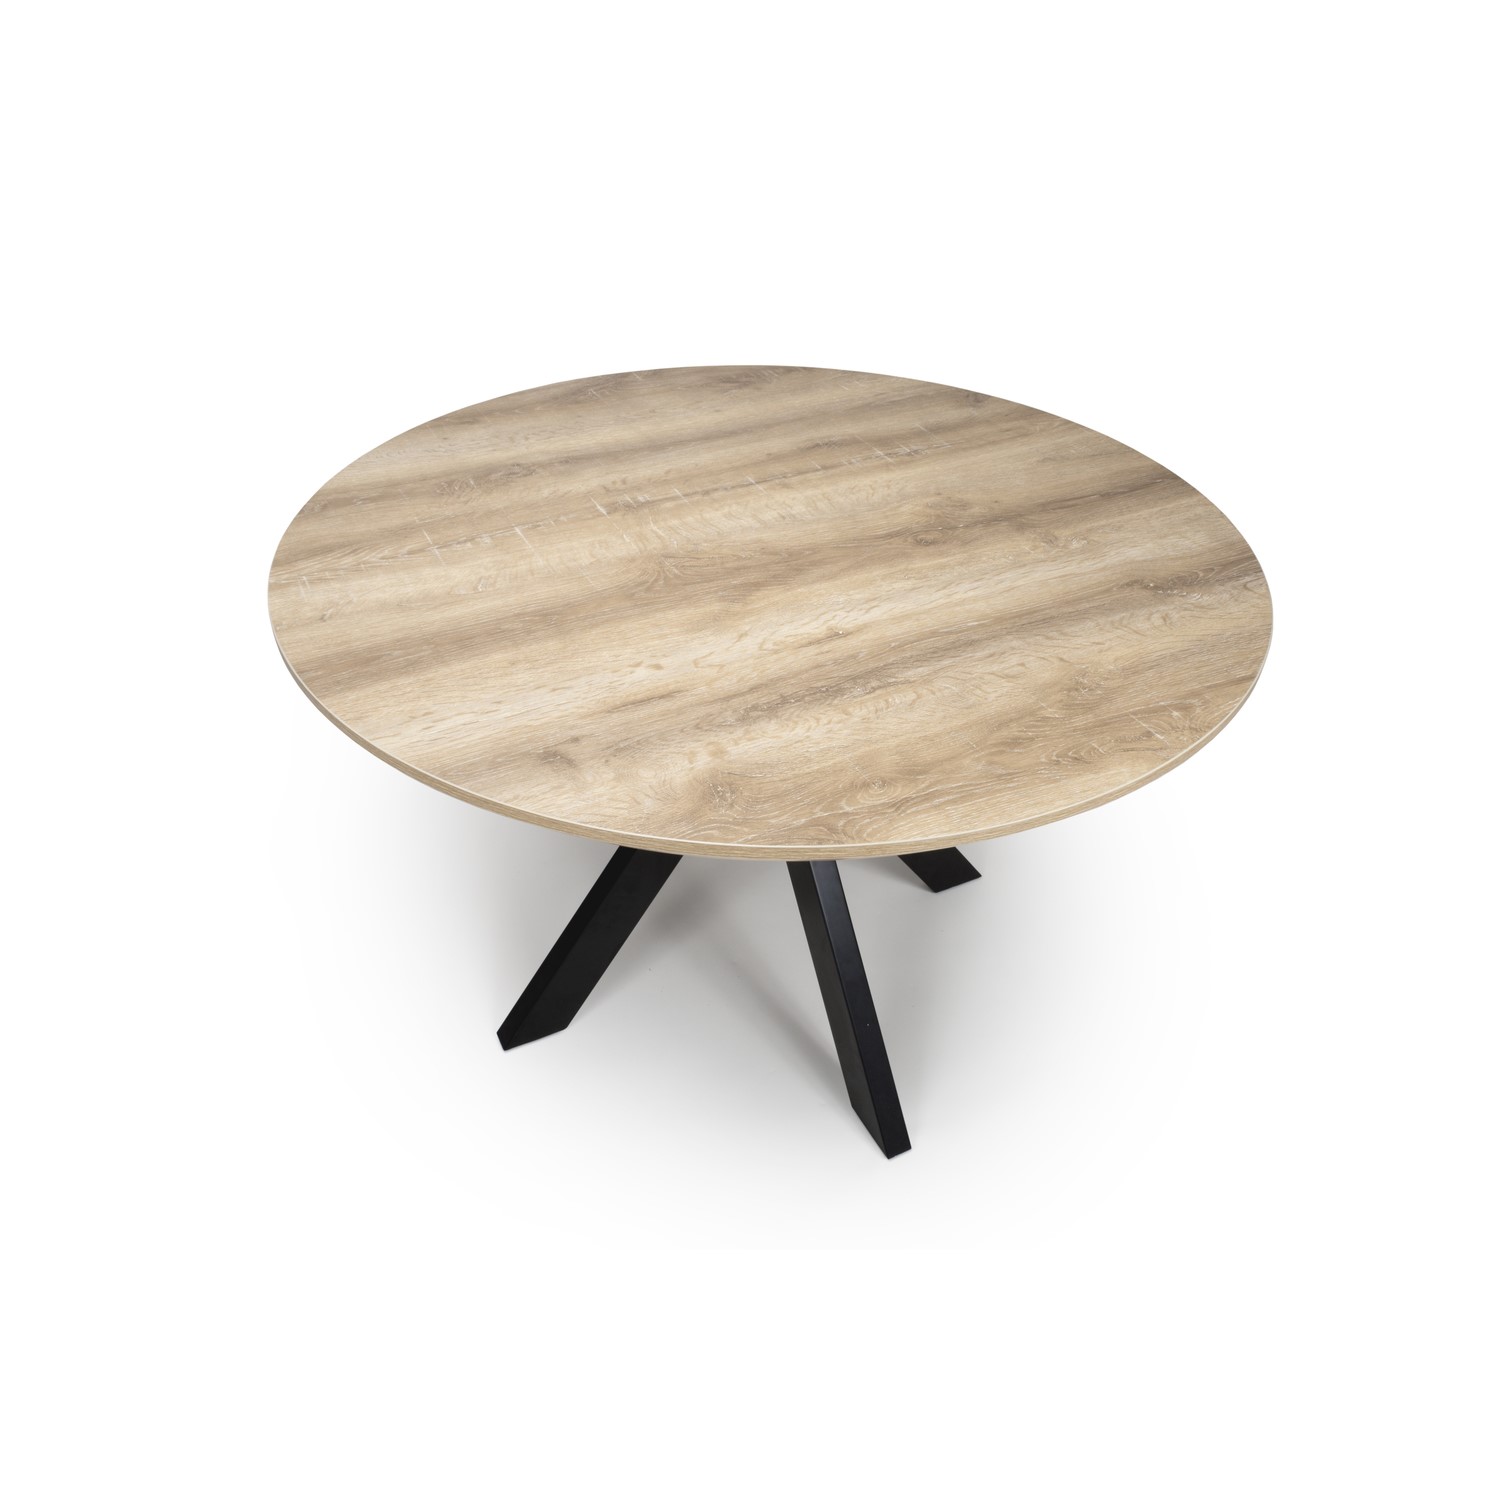 Read more about Round oak dining table liberty